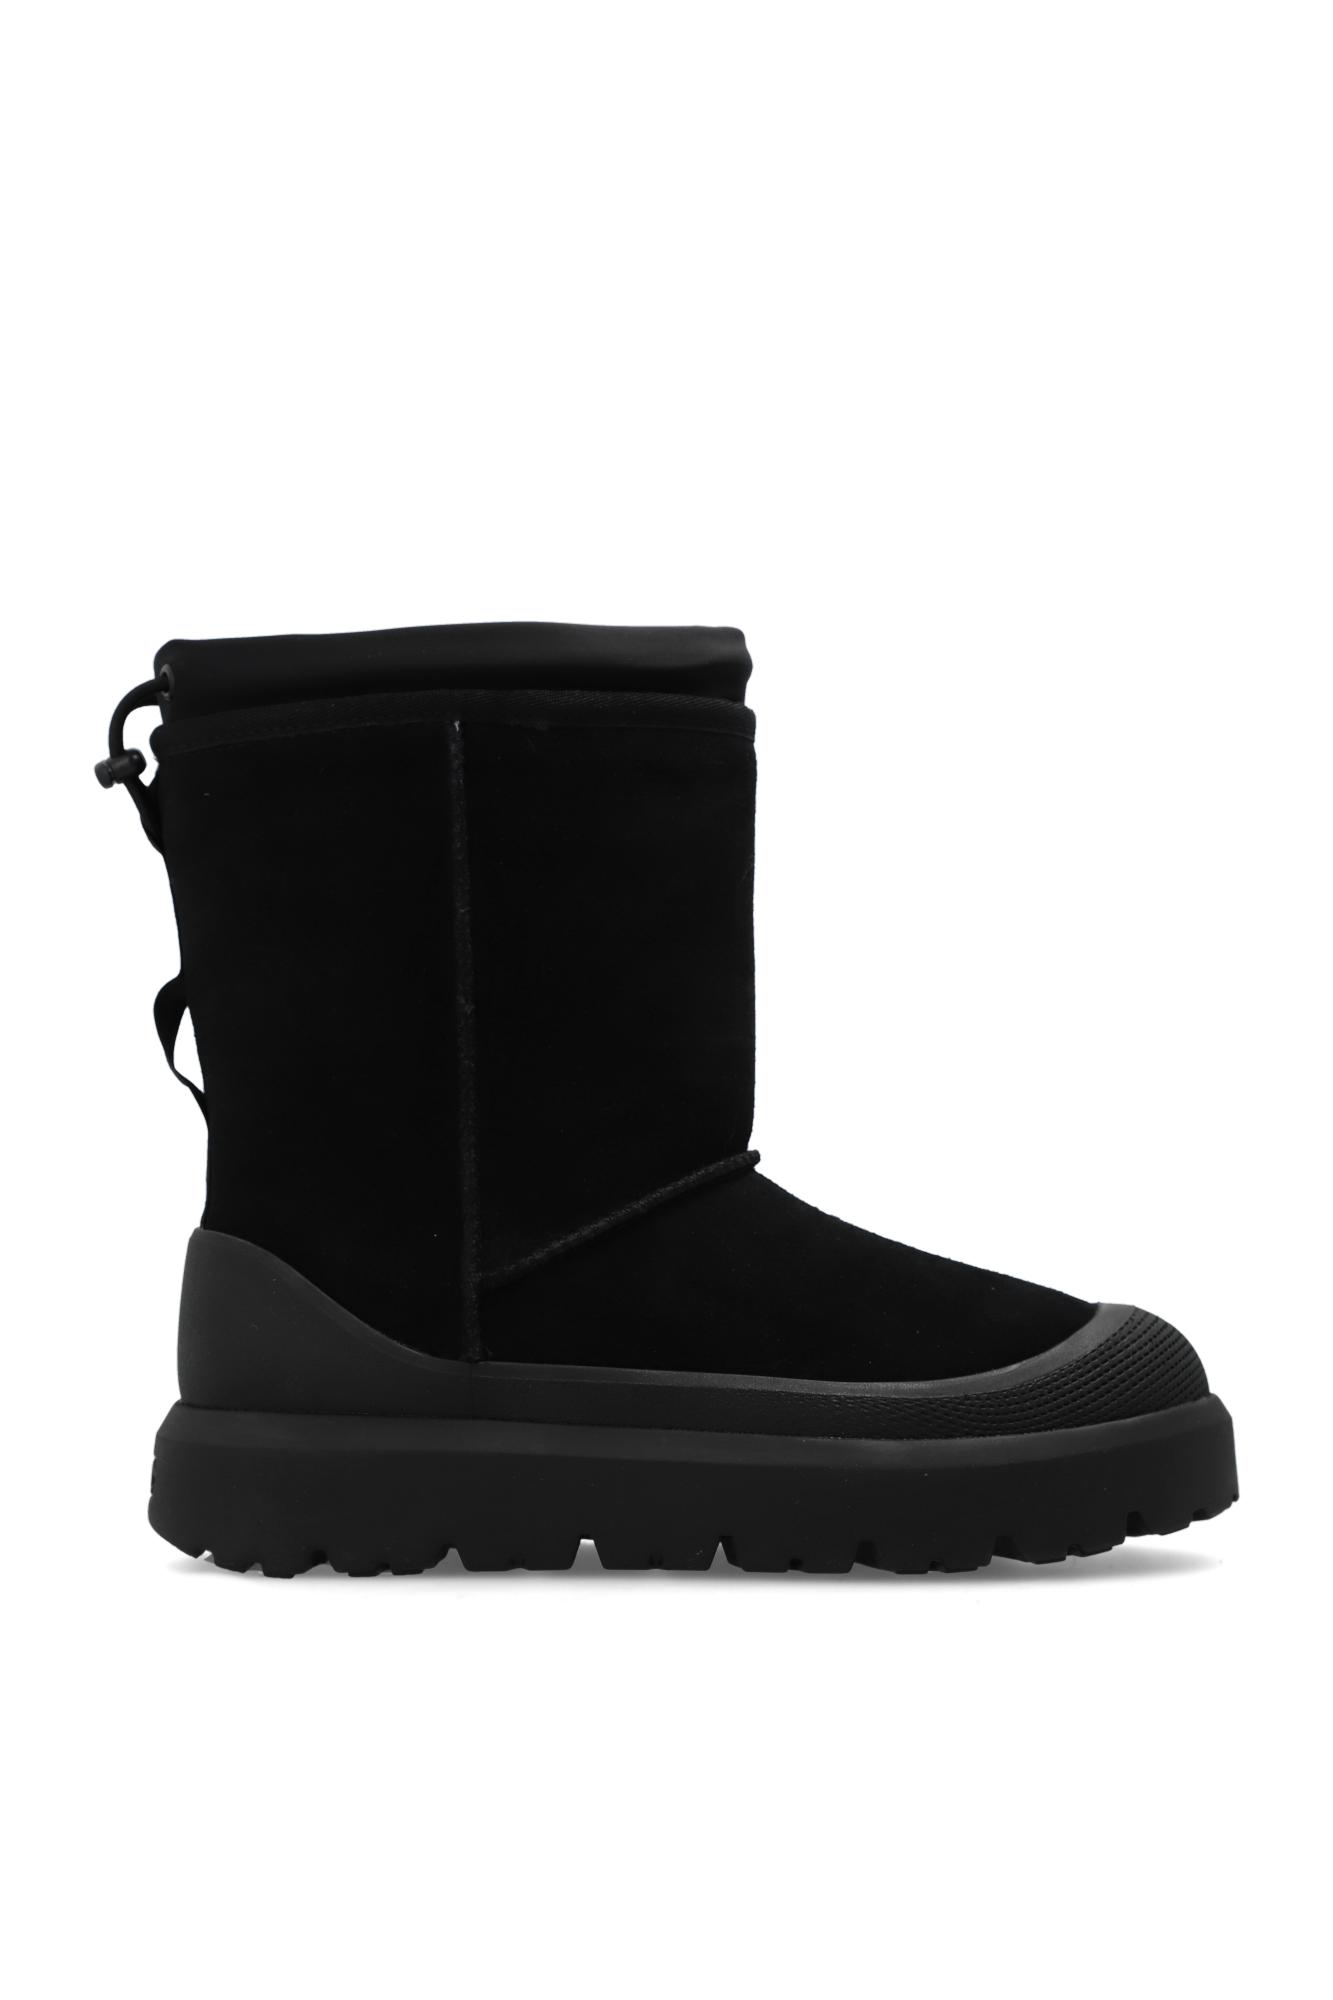 UGG 'classic Short Weather Hybrid' Snow Boots in Black for Men | Lyst